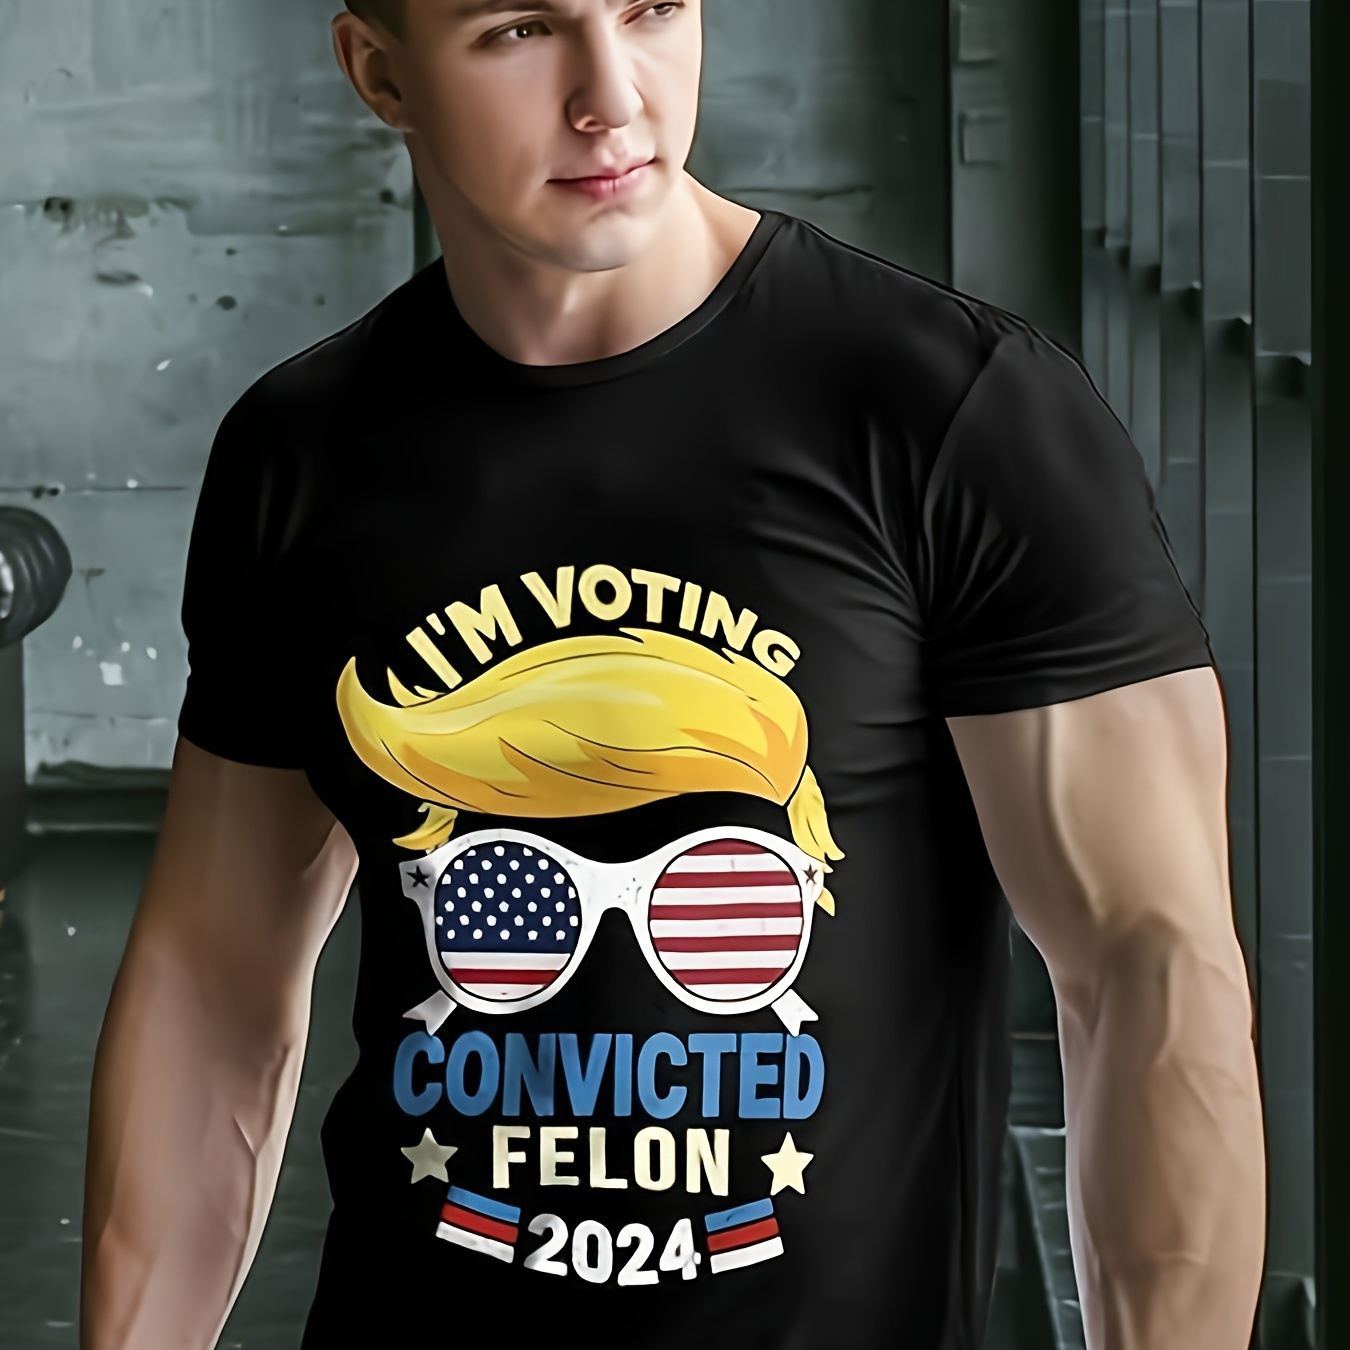 

Printed Tops, I'm Voting For The Convicted 2024, Plus Size Men's T-shirts Cotton Crew Neck T-shirts Moisture Wicking T-shirts Summer Fashion Casual Short Sleeve T-shirts, Outdoor Sports Clothing